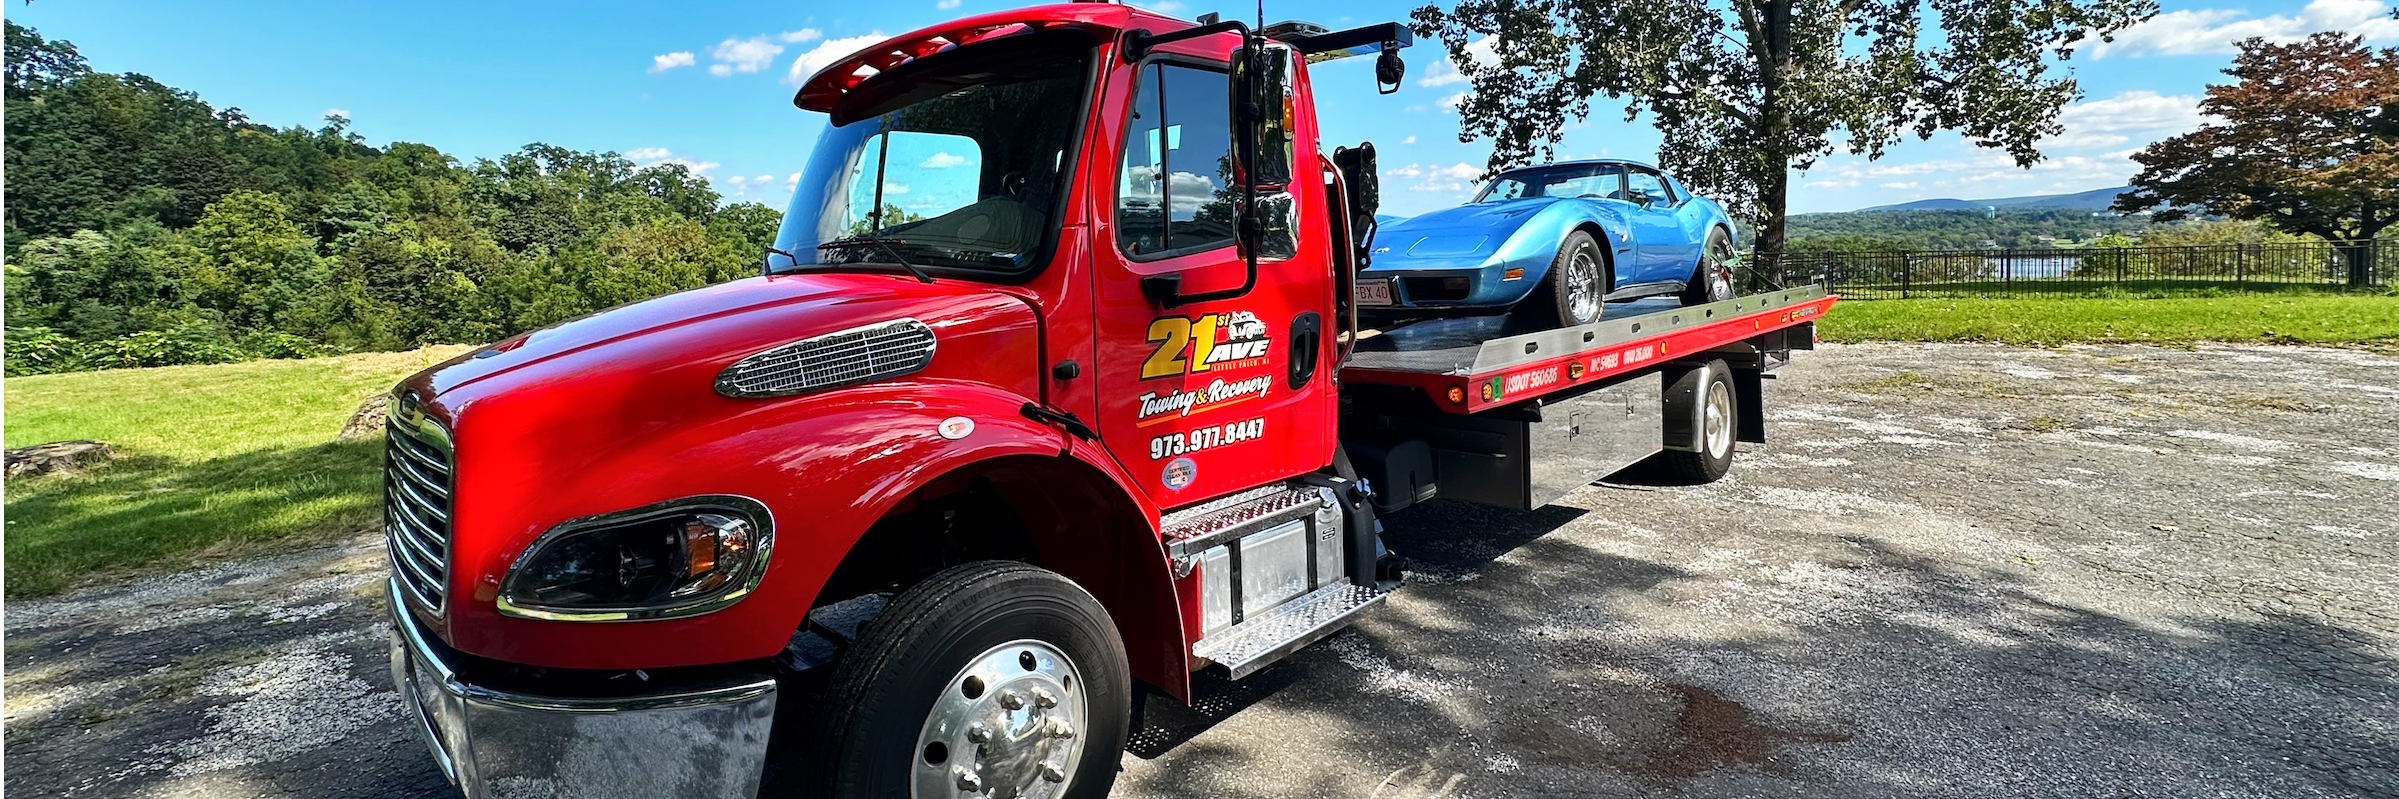 21st Ave Towing & Recovery, Inc. Towing.com Profile Banner